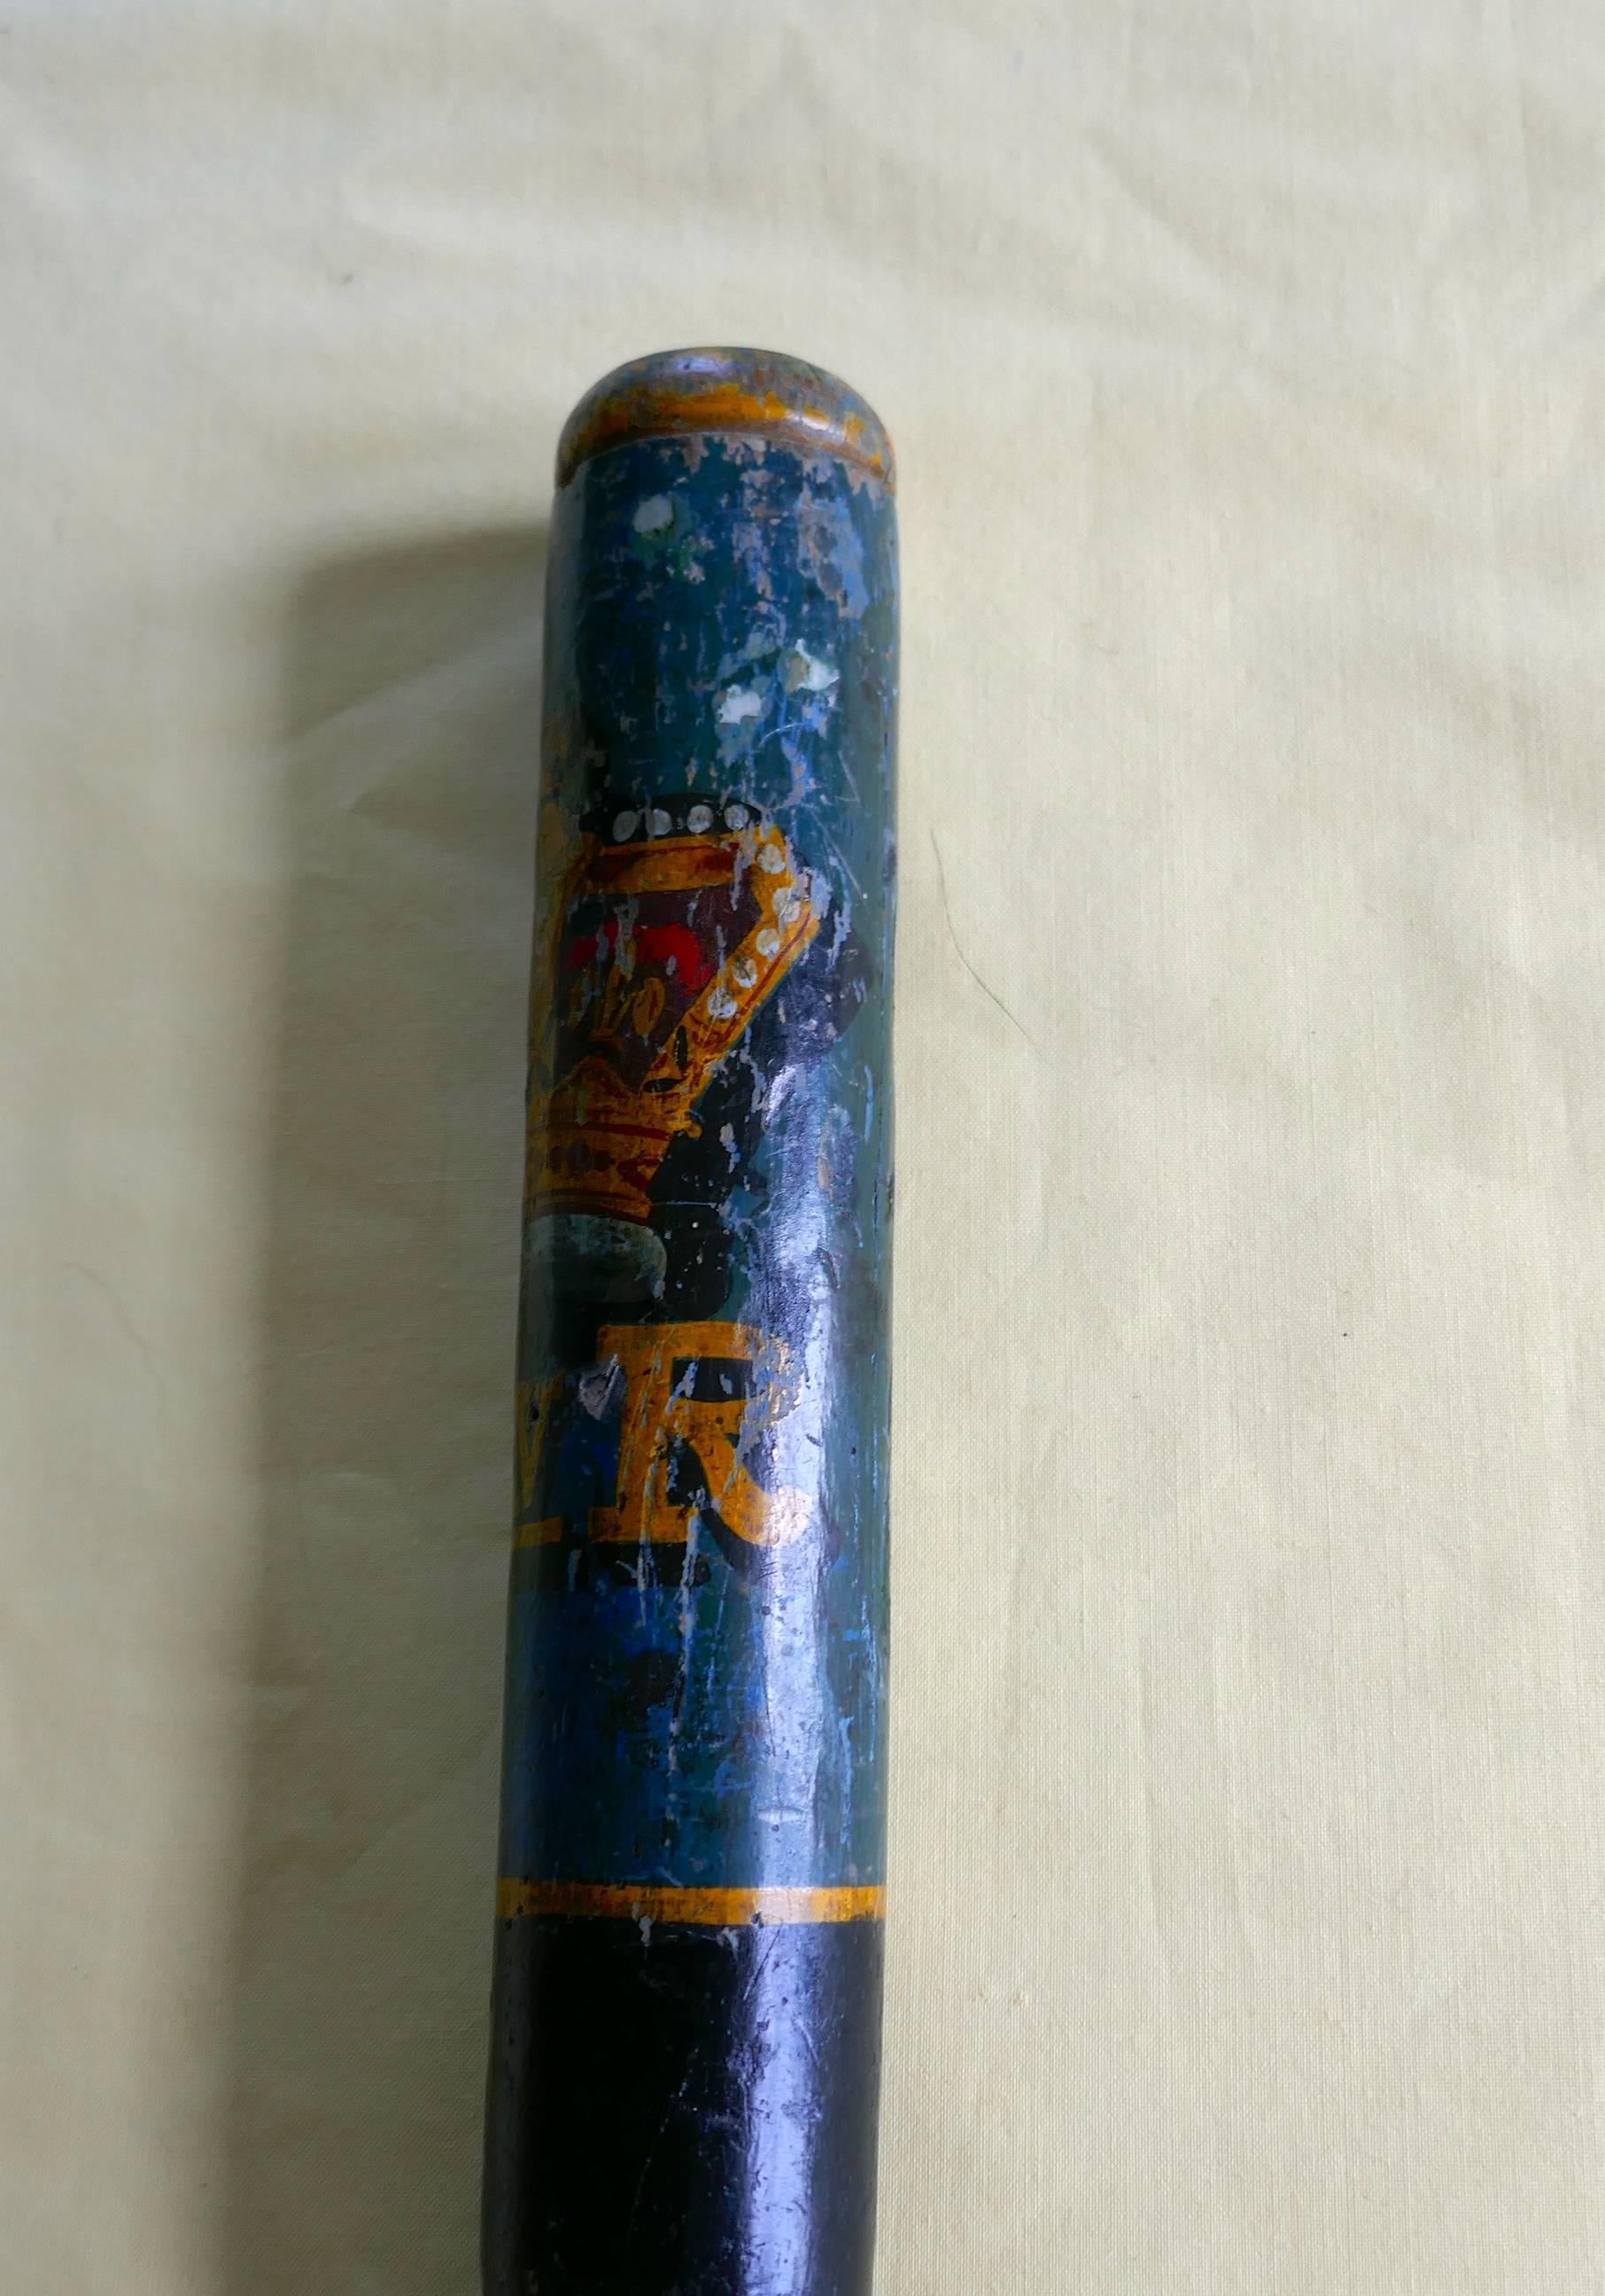 A William IV Policeman’s truncheon

A great piece of social history, the baton has a shaped handle, the lower part is ebonised and the upper part has a blue background with the crown cypher for W IV R.

A good honest piece unrestored piece, it